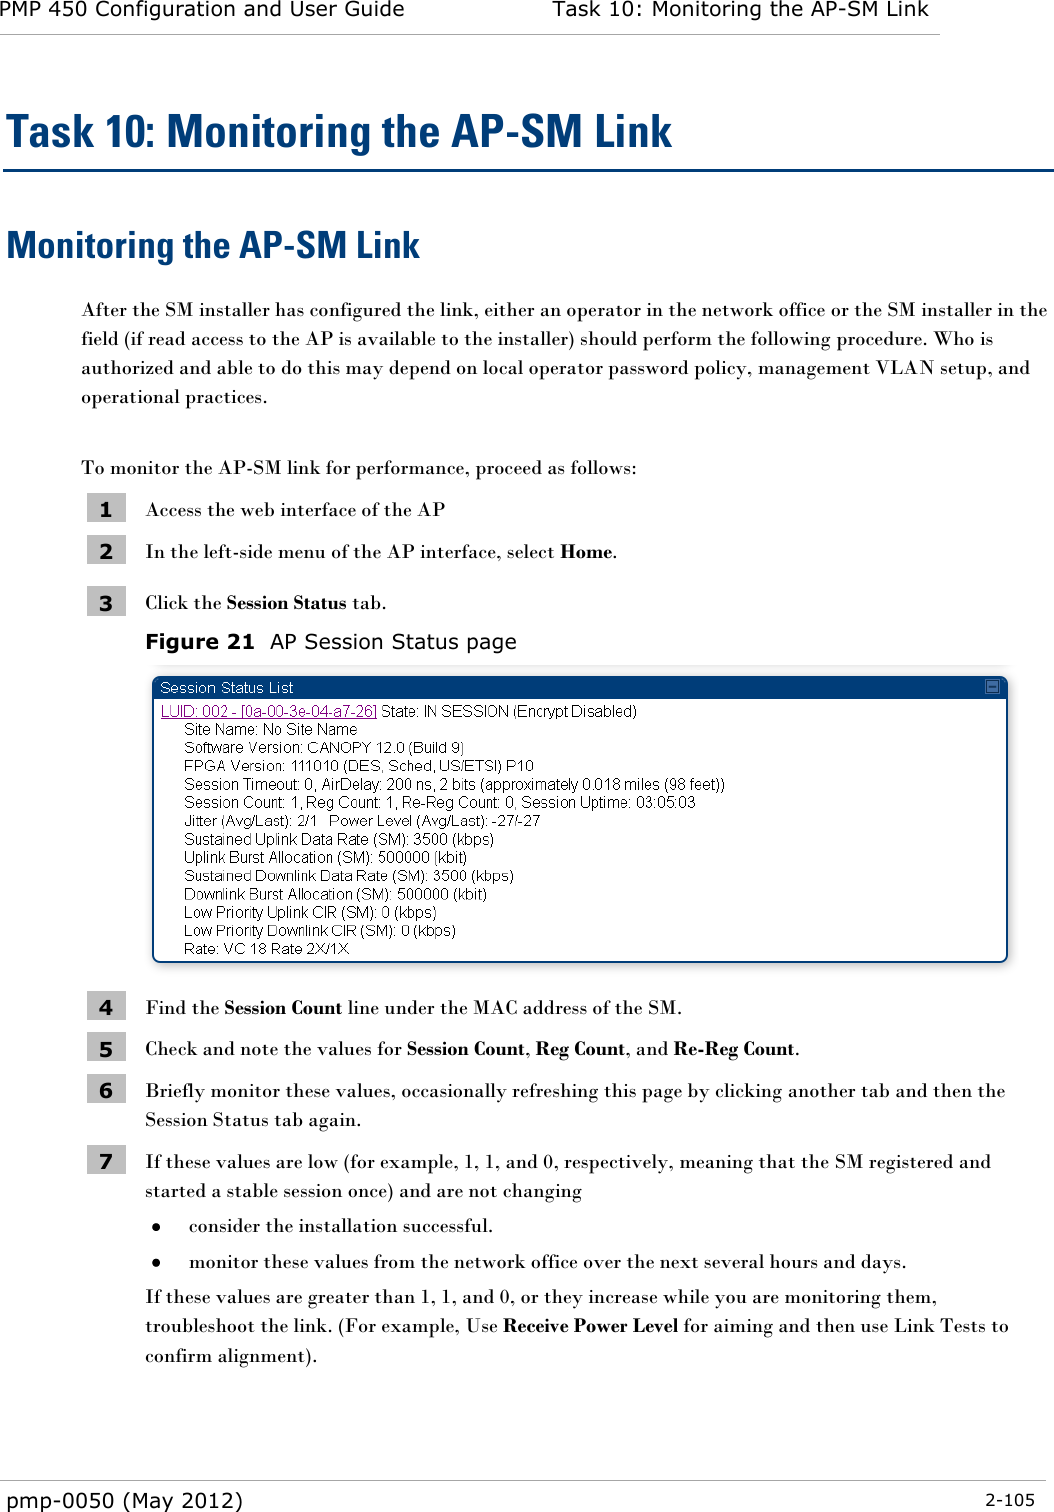 PMP 450 Configuration and User Guide Task 10: Monitoring the AP-SM Link  pmp-0050 (May 2012)  2-105  Task 10: Monitoring the AP-SM Link Monitoring the AP-SM Link After the SM installer has configured the link, either an operator in the network office or the SM installer in the field (if read access to the AP is available to the installer) should perform the following procedure. Who is authorized and able to do this may depend on local operator password policy, management VLAN setup, and operational practices.  To monitor the AP-SM link for performance, proceed as follows: 1 Access the web interface of the AP 2 In the left-side menu of the AP interface, select Home. 3 Click the Session Status tab.   Figure 21  AP Session Status page  4 Find the Session Count line under the MAC address of the SM. 5 Check and note the values for Session Count, Reg Count, and Re-Reg Count.  6 Briefly monitor these values, occasionally refreshing this page by clicking another tab and then the Session Status tab again. 7 If these values are low (for example, 1, 1, and 0, respectively, meaning that the SM registered and started a stable session once) and are not changing  consider the installation successful.  monitor these values from the network office over the next several hours and days. If these values are greater than 1, 1, and 0, or they increase while you are monitoring them, troubleshoot the link. (For example, Use Receive Power Level for aiming and then use Link Tests to confirm alignment).  